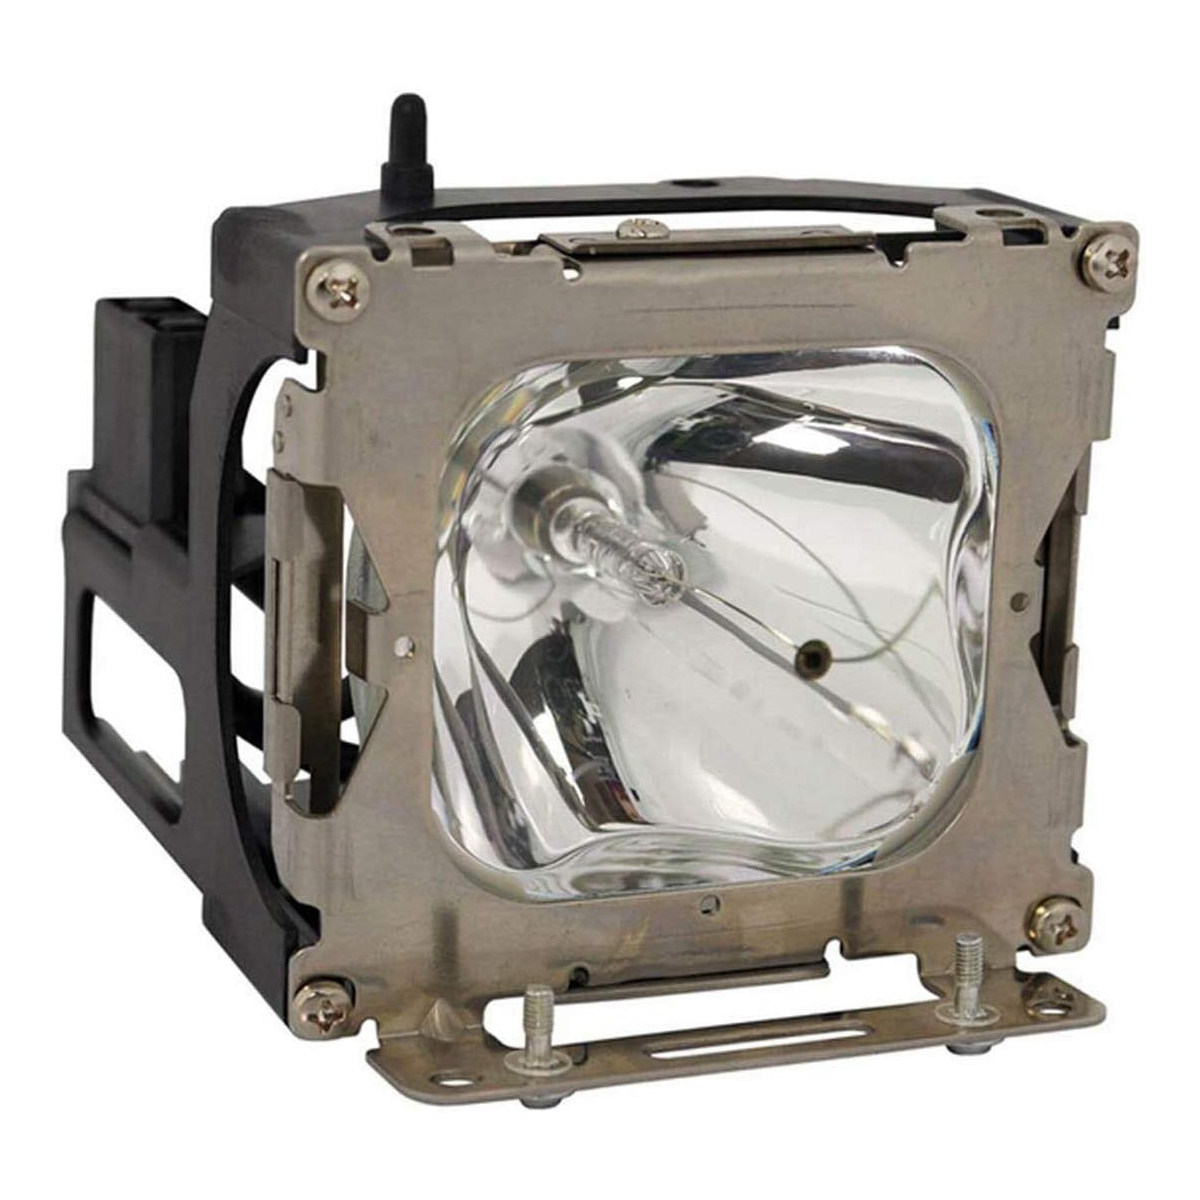 Replacement Projector lamp DT00201 For HITACHI CP-X935